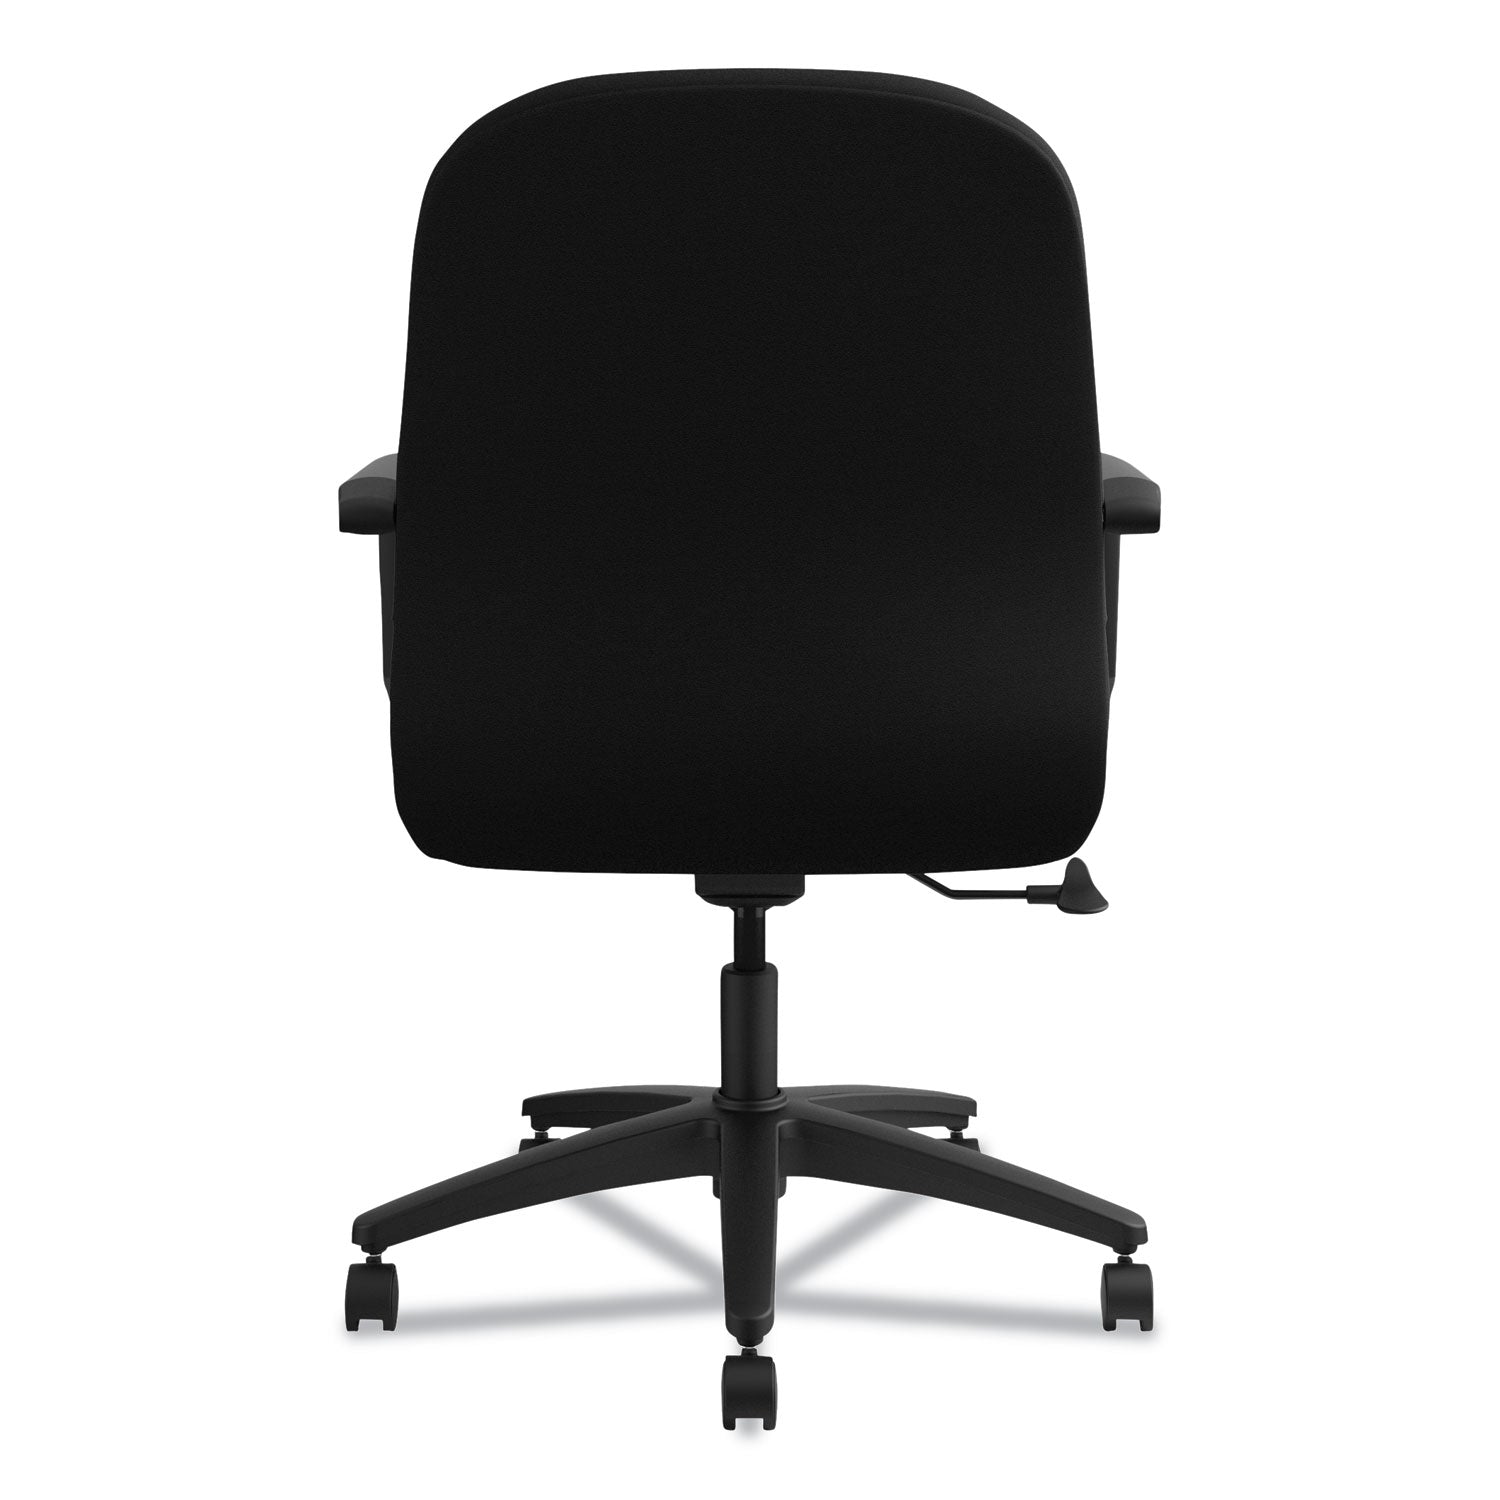 pillow-soft-2090-series-managerial-mid-back-swivel-tilt-chair-supports-up-to-300-lb-17-to-21-seat-height-black_hon2092cu10t - 7